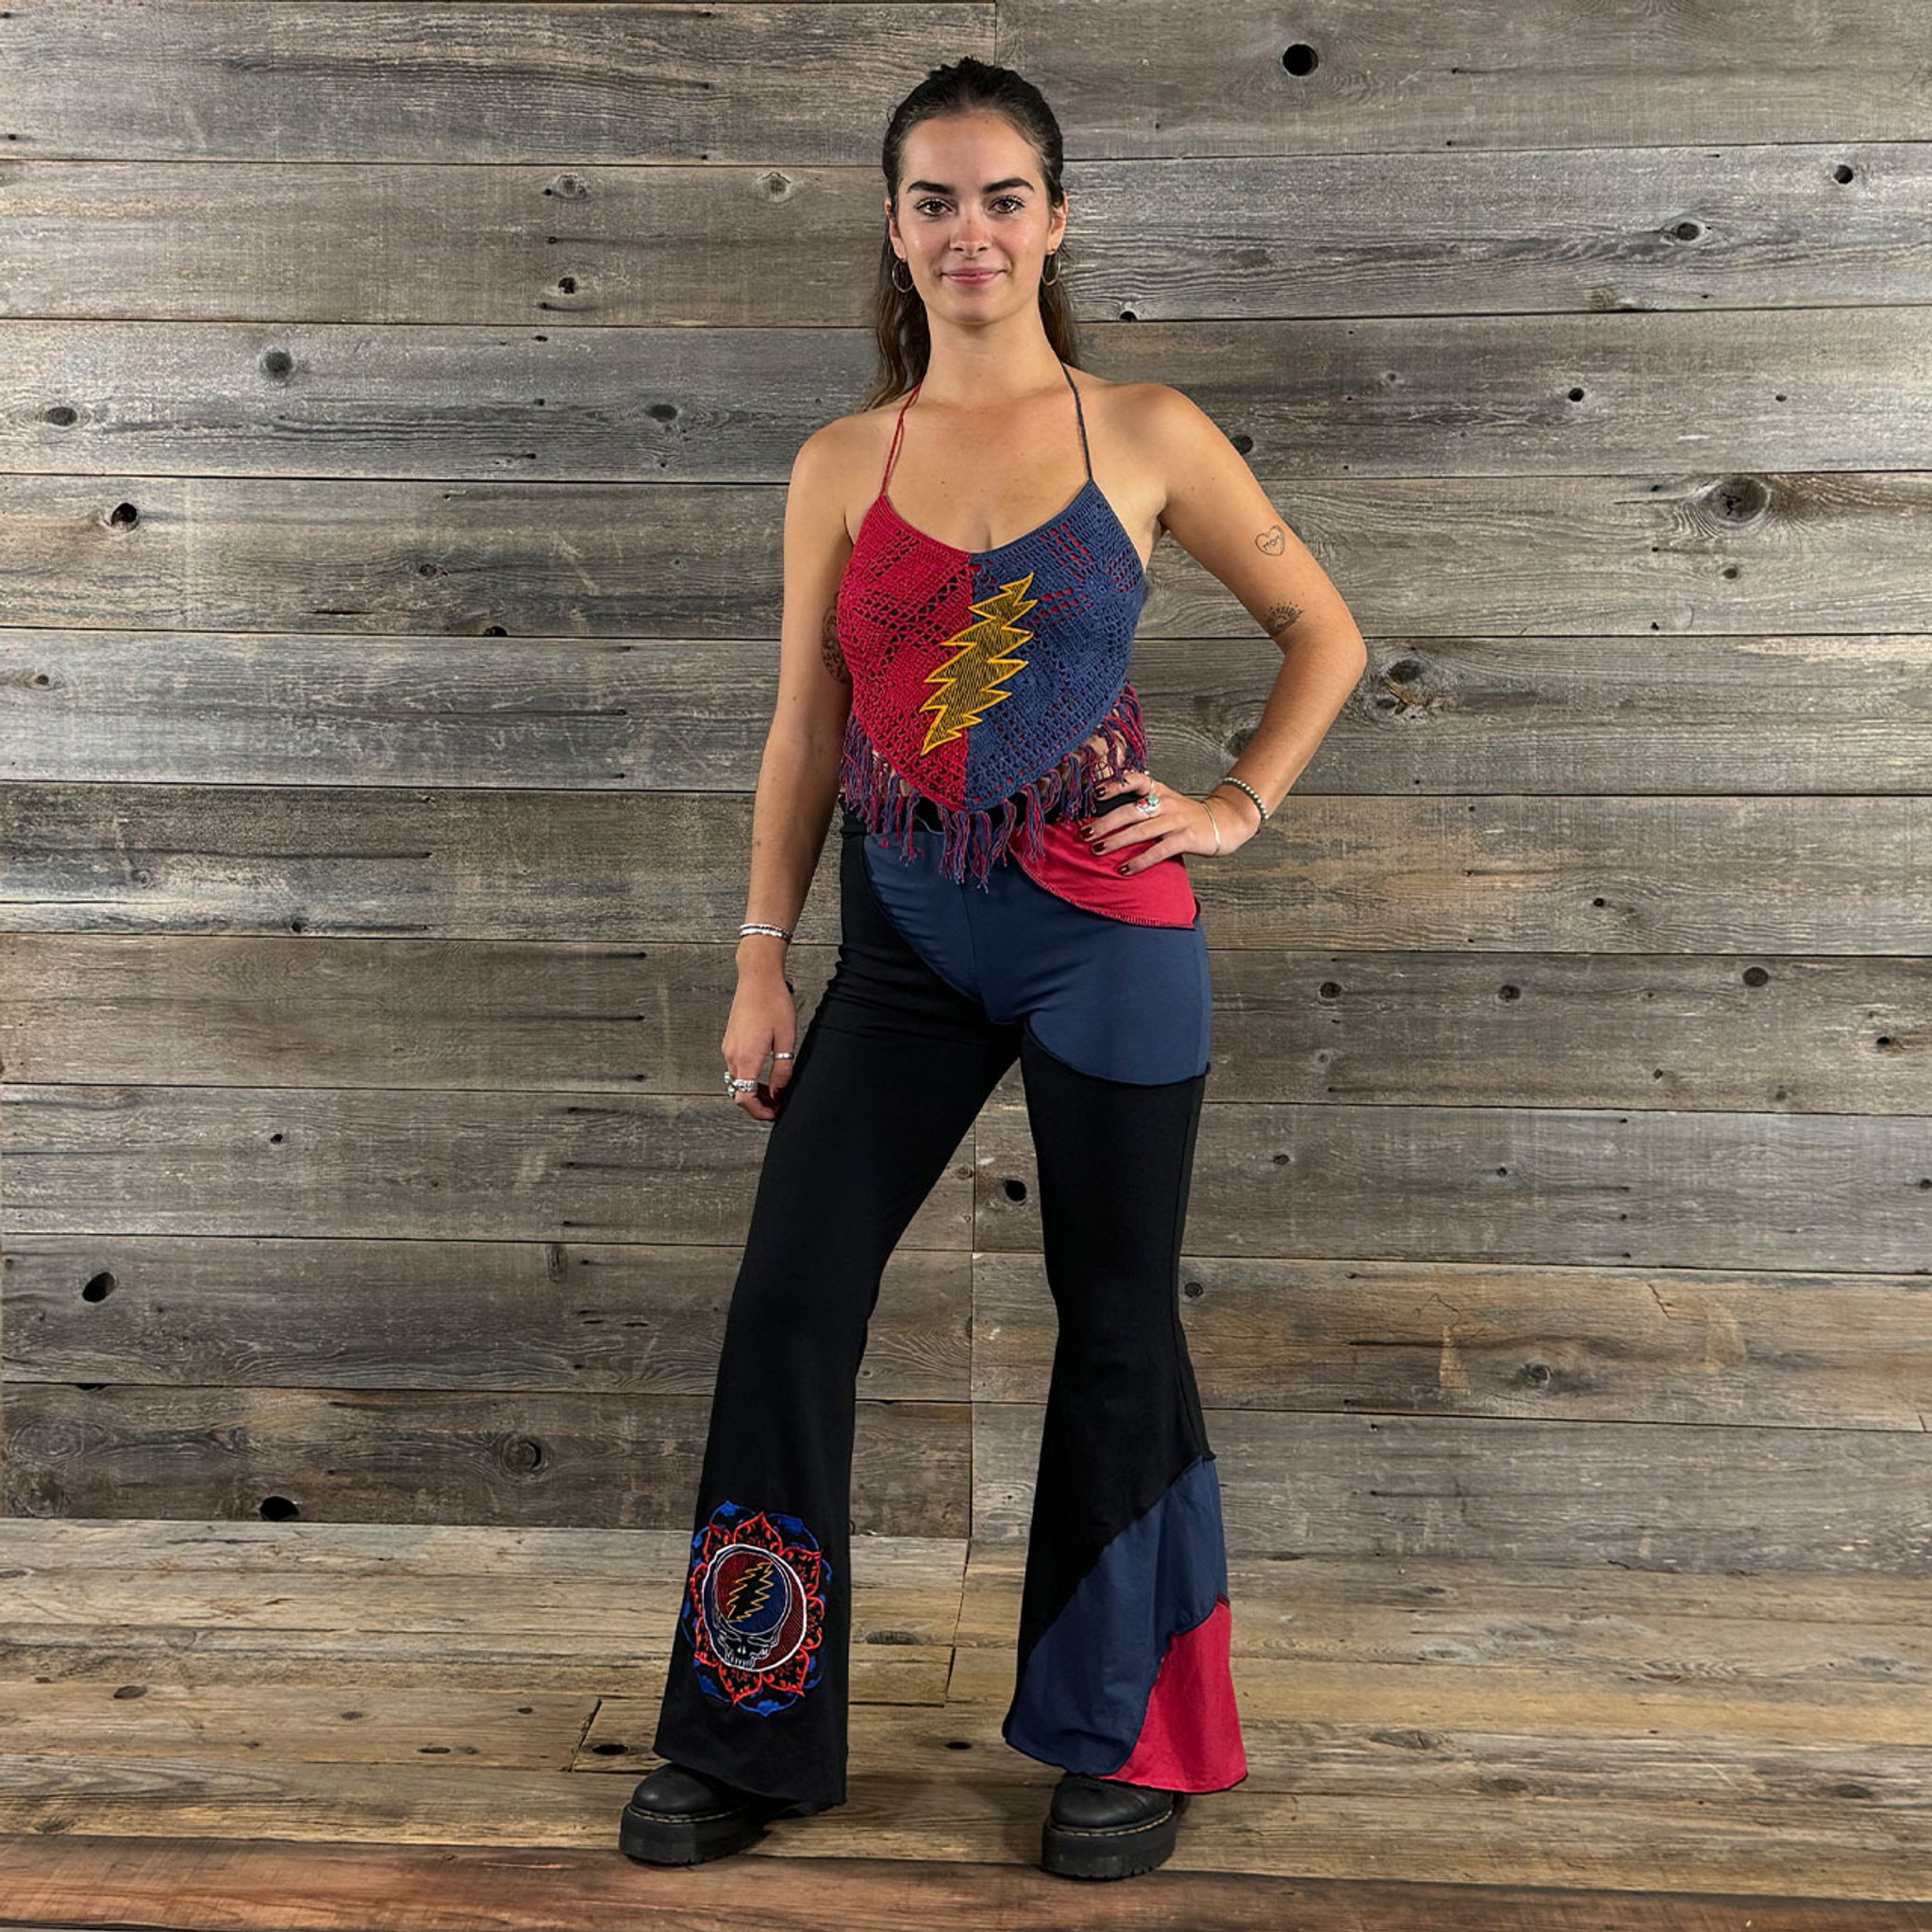 WEST LA PANTS WEST LA PANTS crafted from cotton lycra with solid panels and adorned with Grateful Dead Steal Your Face mandala and bolt embroidery, perfect for adding a rock 'n' roll edge to your wardrobe